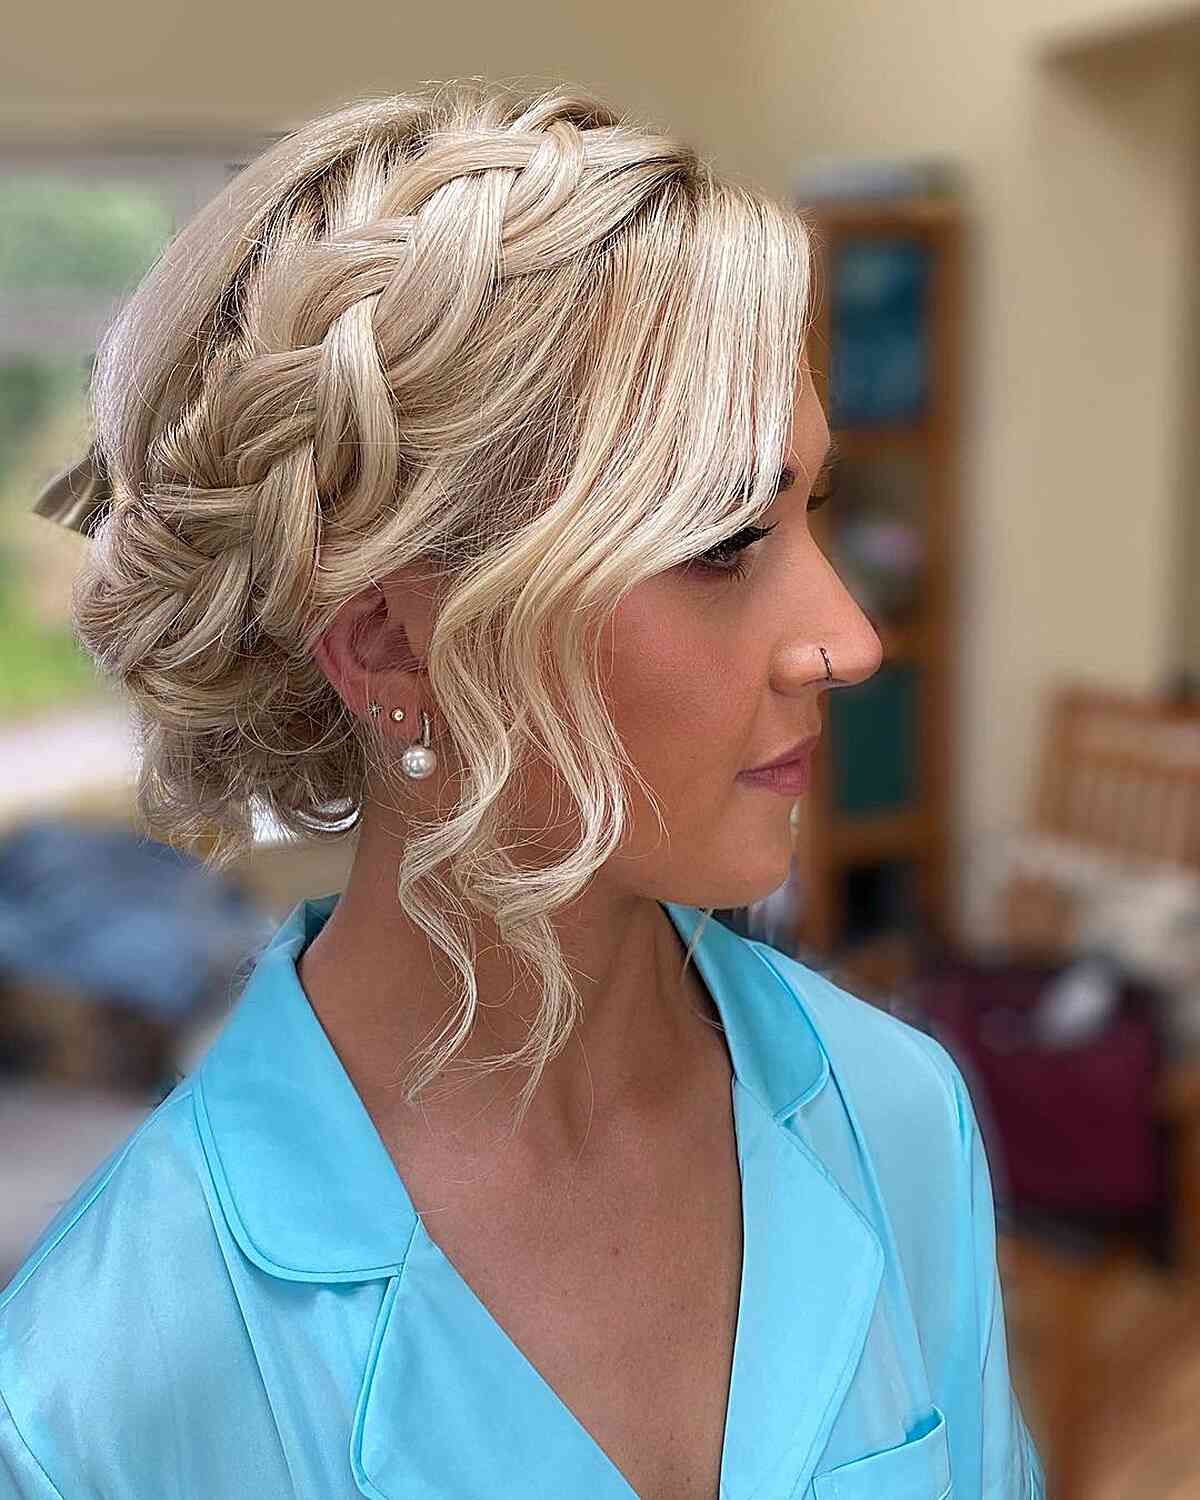 Braids for Short Hair with Bangs